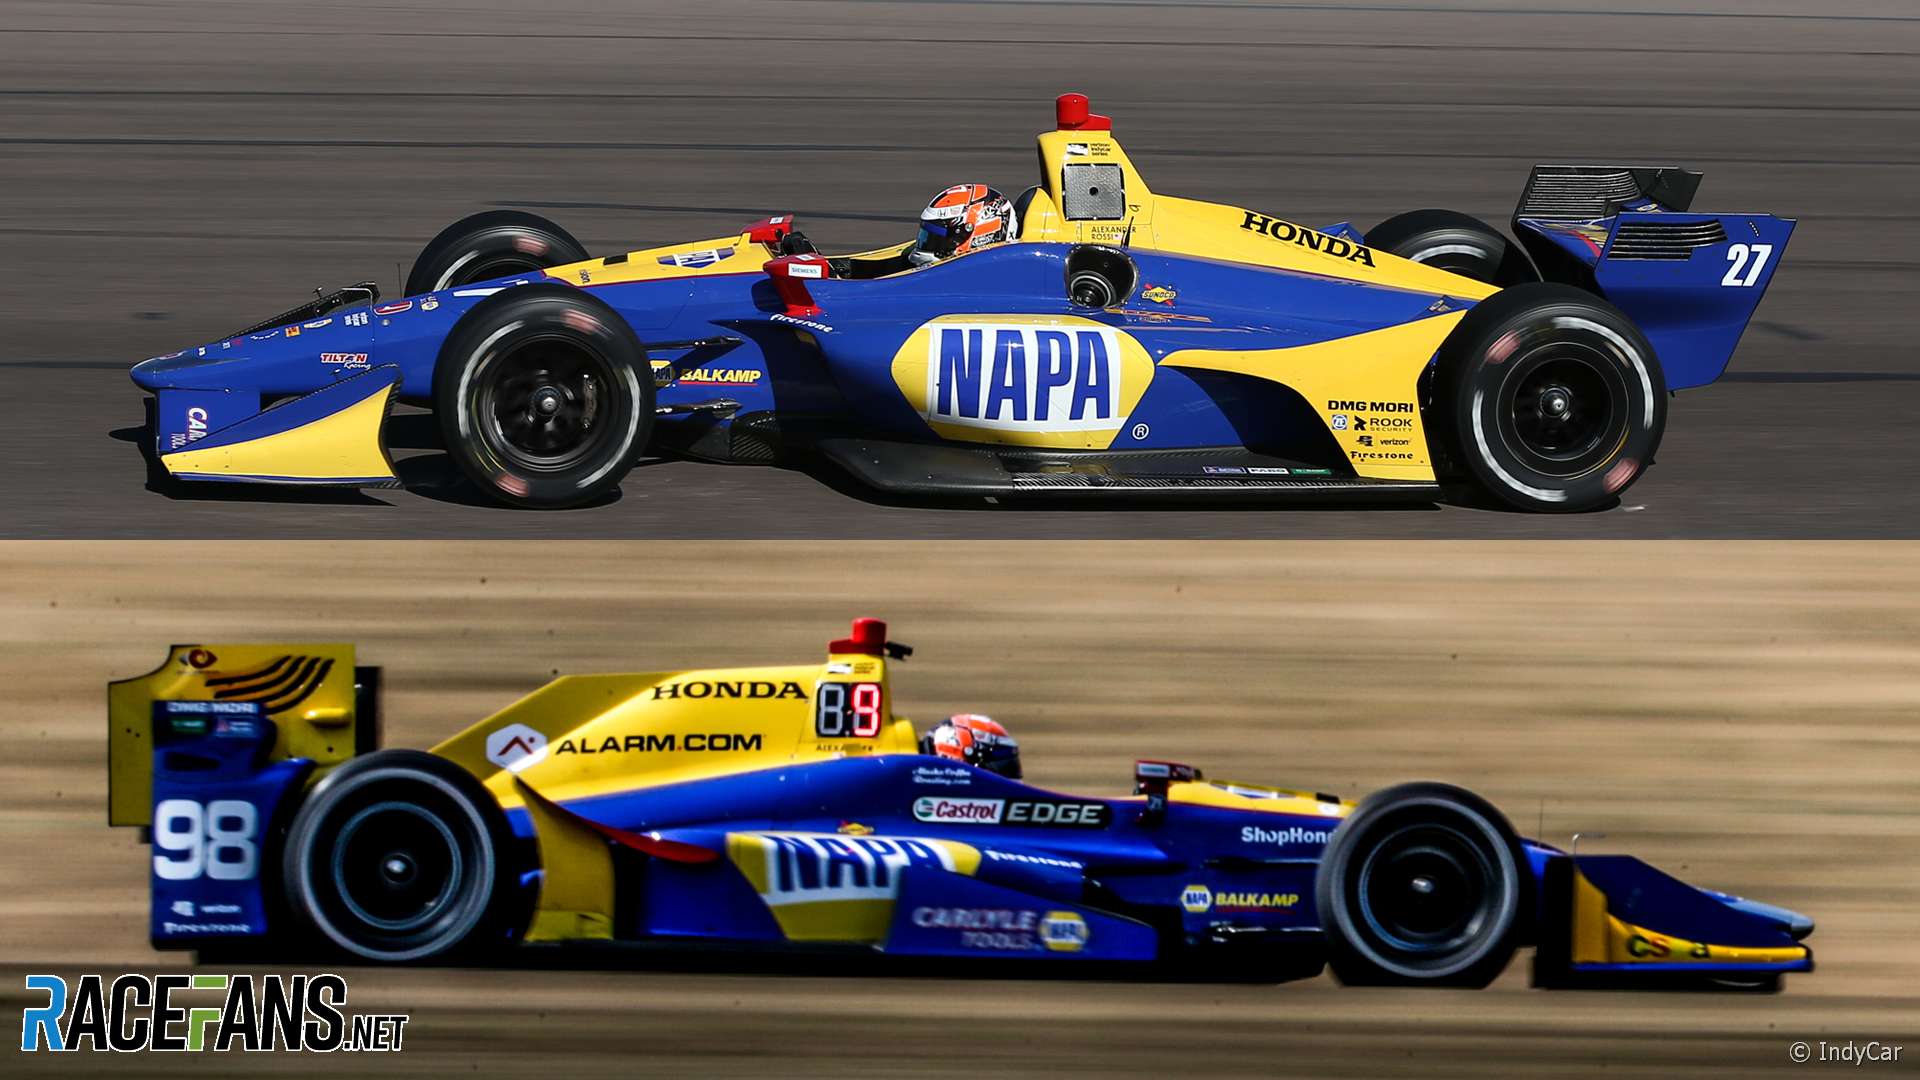 Alexander Rossi 2018 and 2017